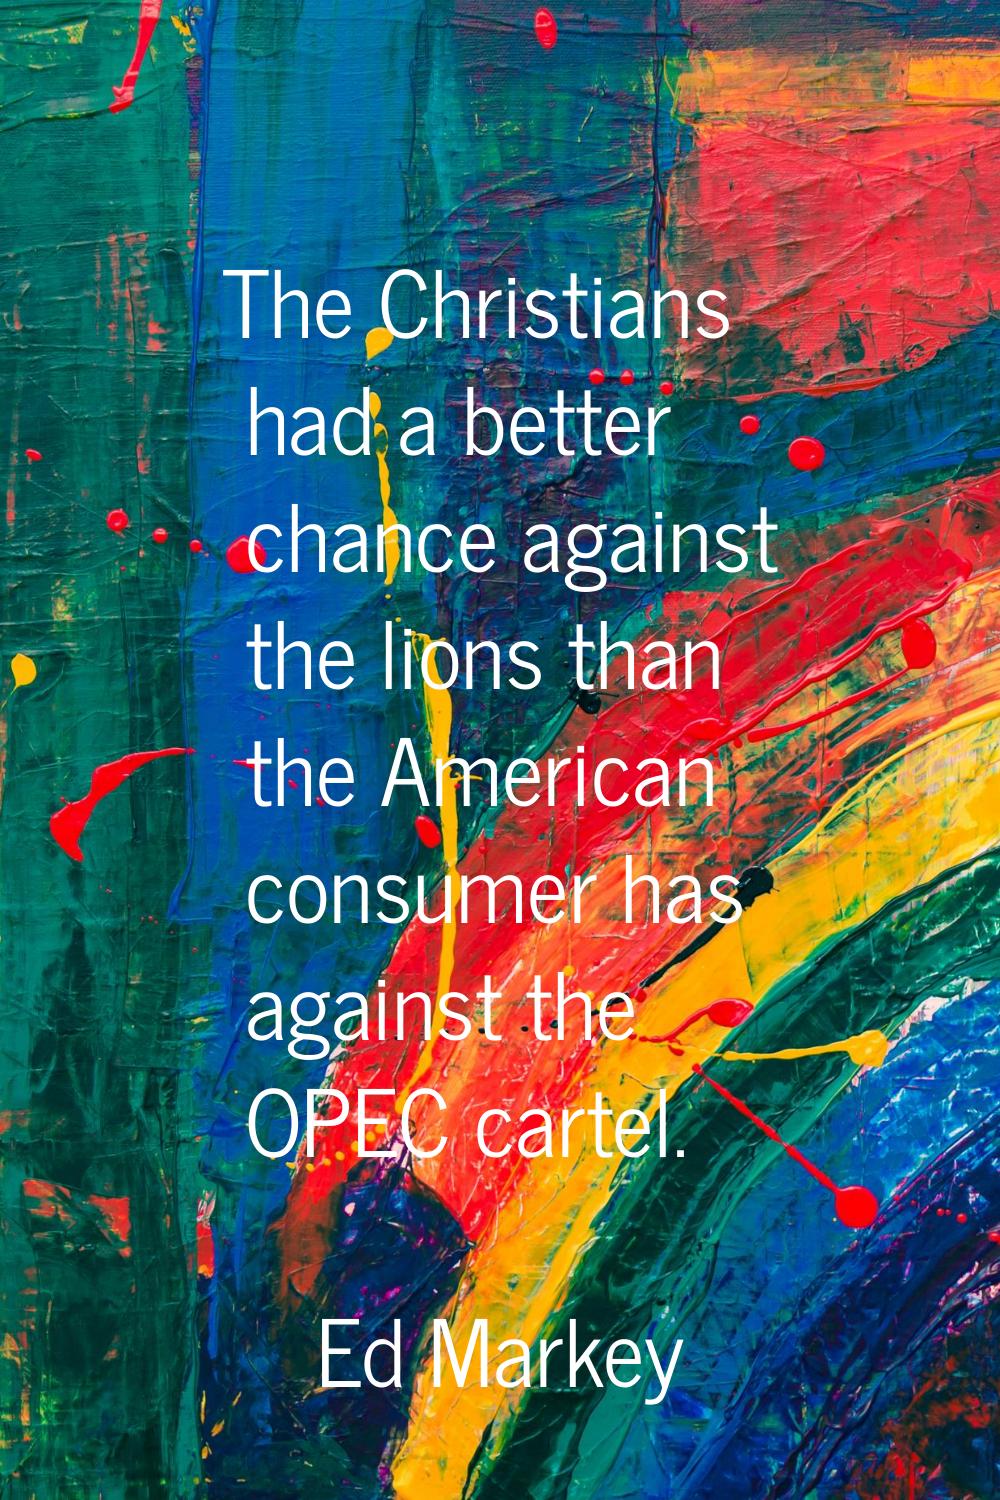 The Christians had a better chance against the lions than the American consumer has against the OPE